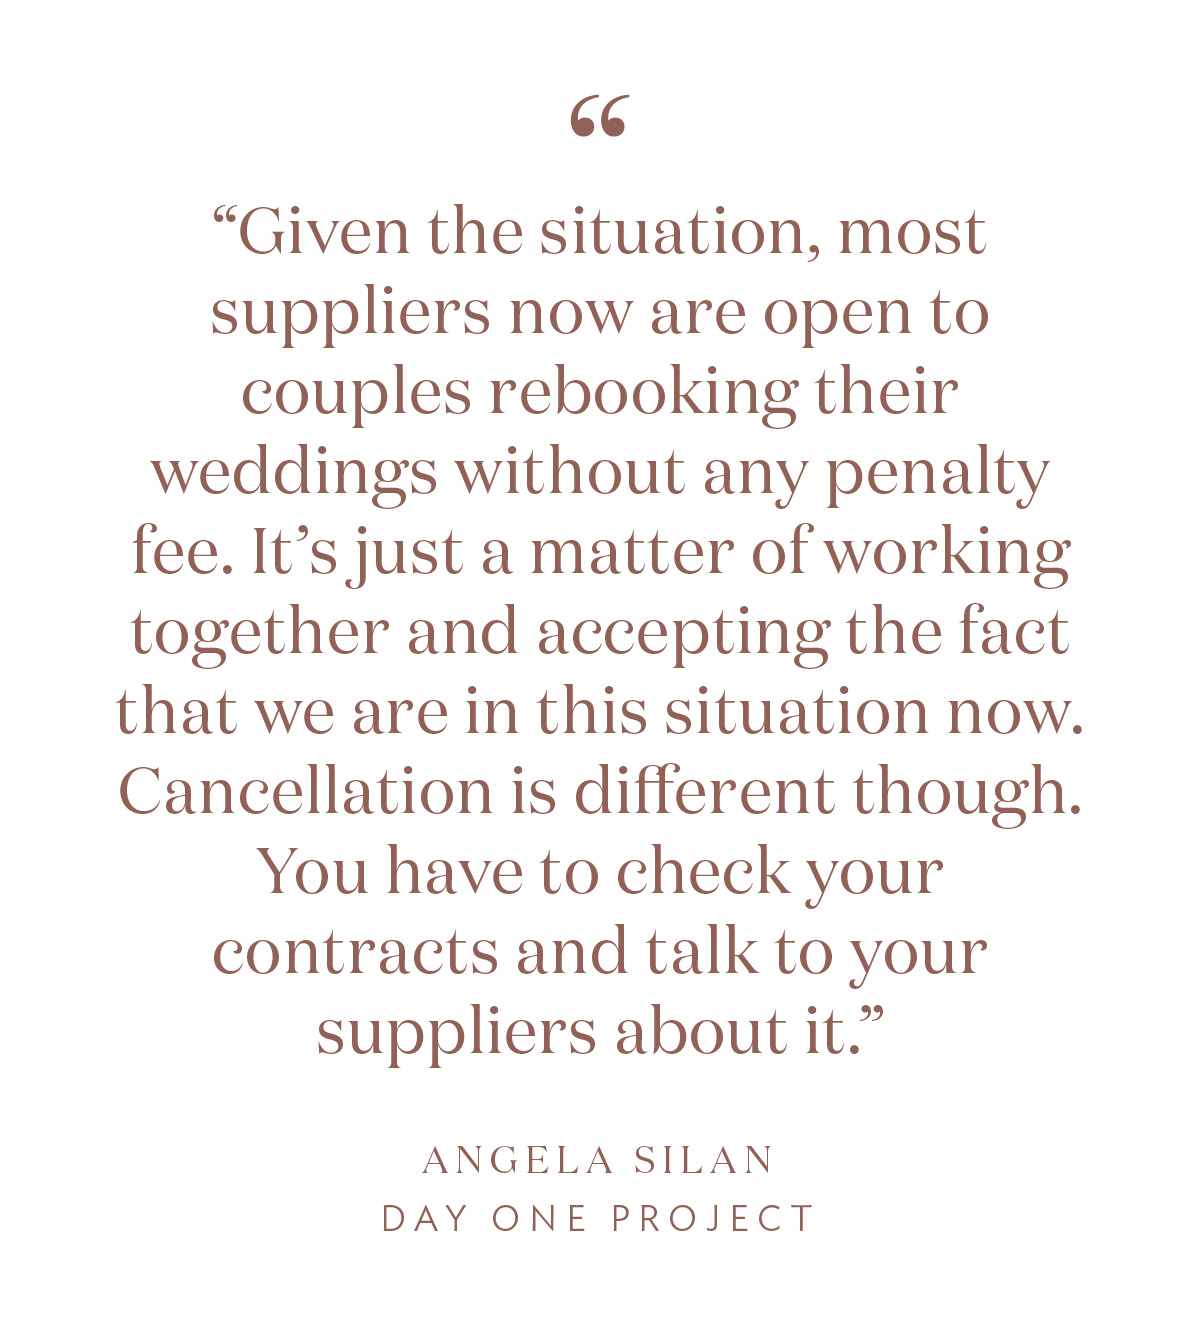 “Given the situation, most suppliers now are open to couples rebooking their weddings without any penalty fee. It’s just a matter of working together and accepting the fact that we are in this situation now. Cancellation is different though. You have to check your contracts and talk to your suppliers about it.” -Angela Silan, Day One Project